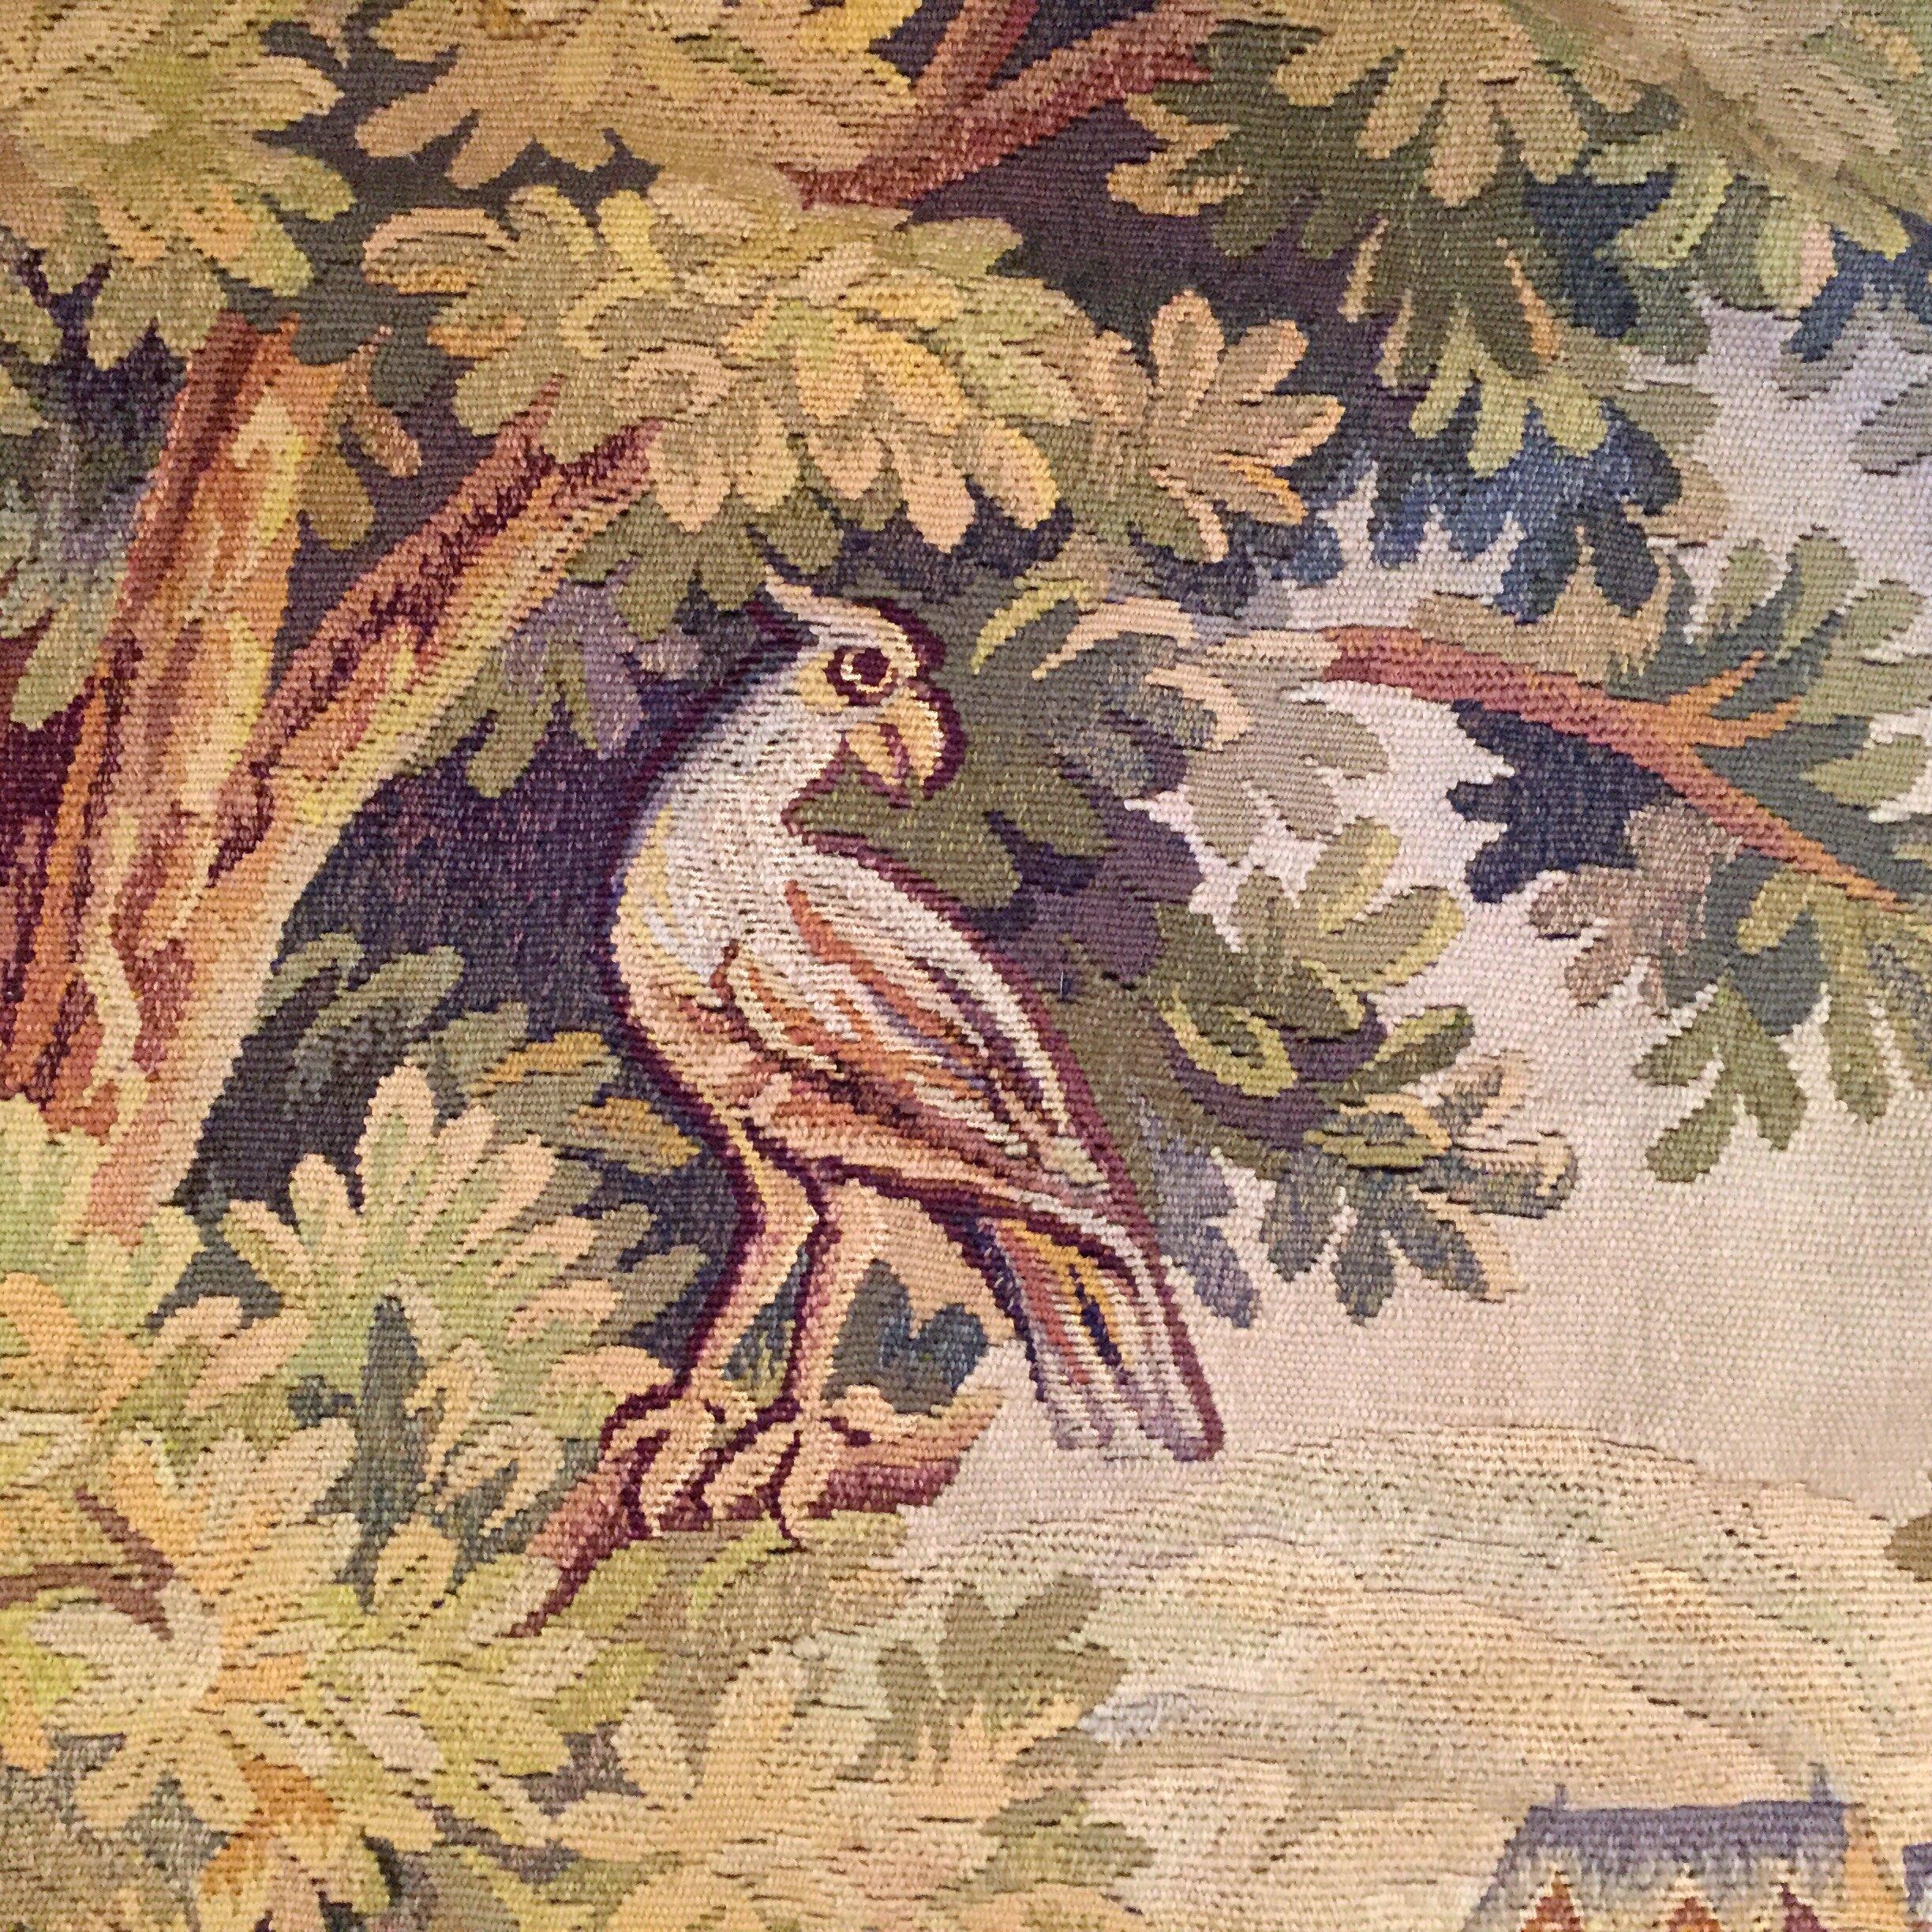 French Verdure Tapestry With Castle And Birds, 19th Century In Good Condition For Sale In Free Union, VA